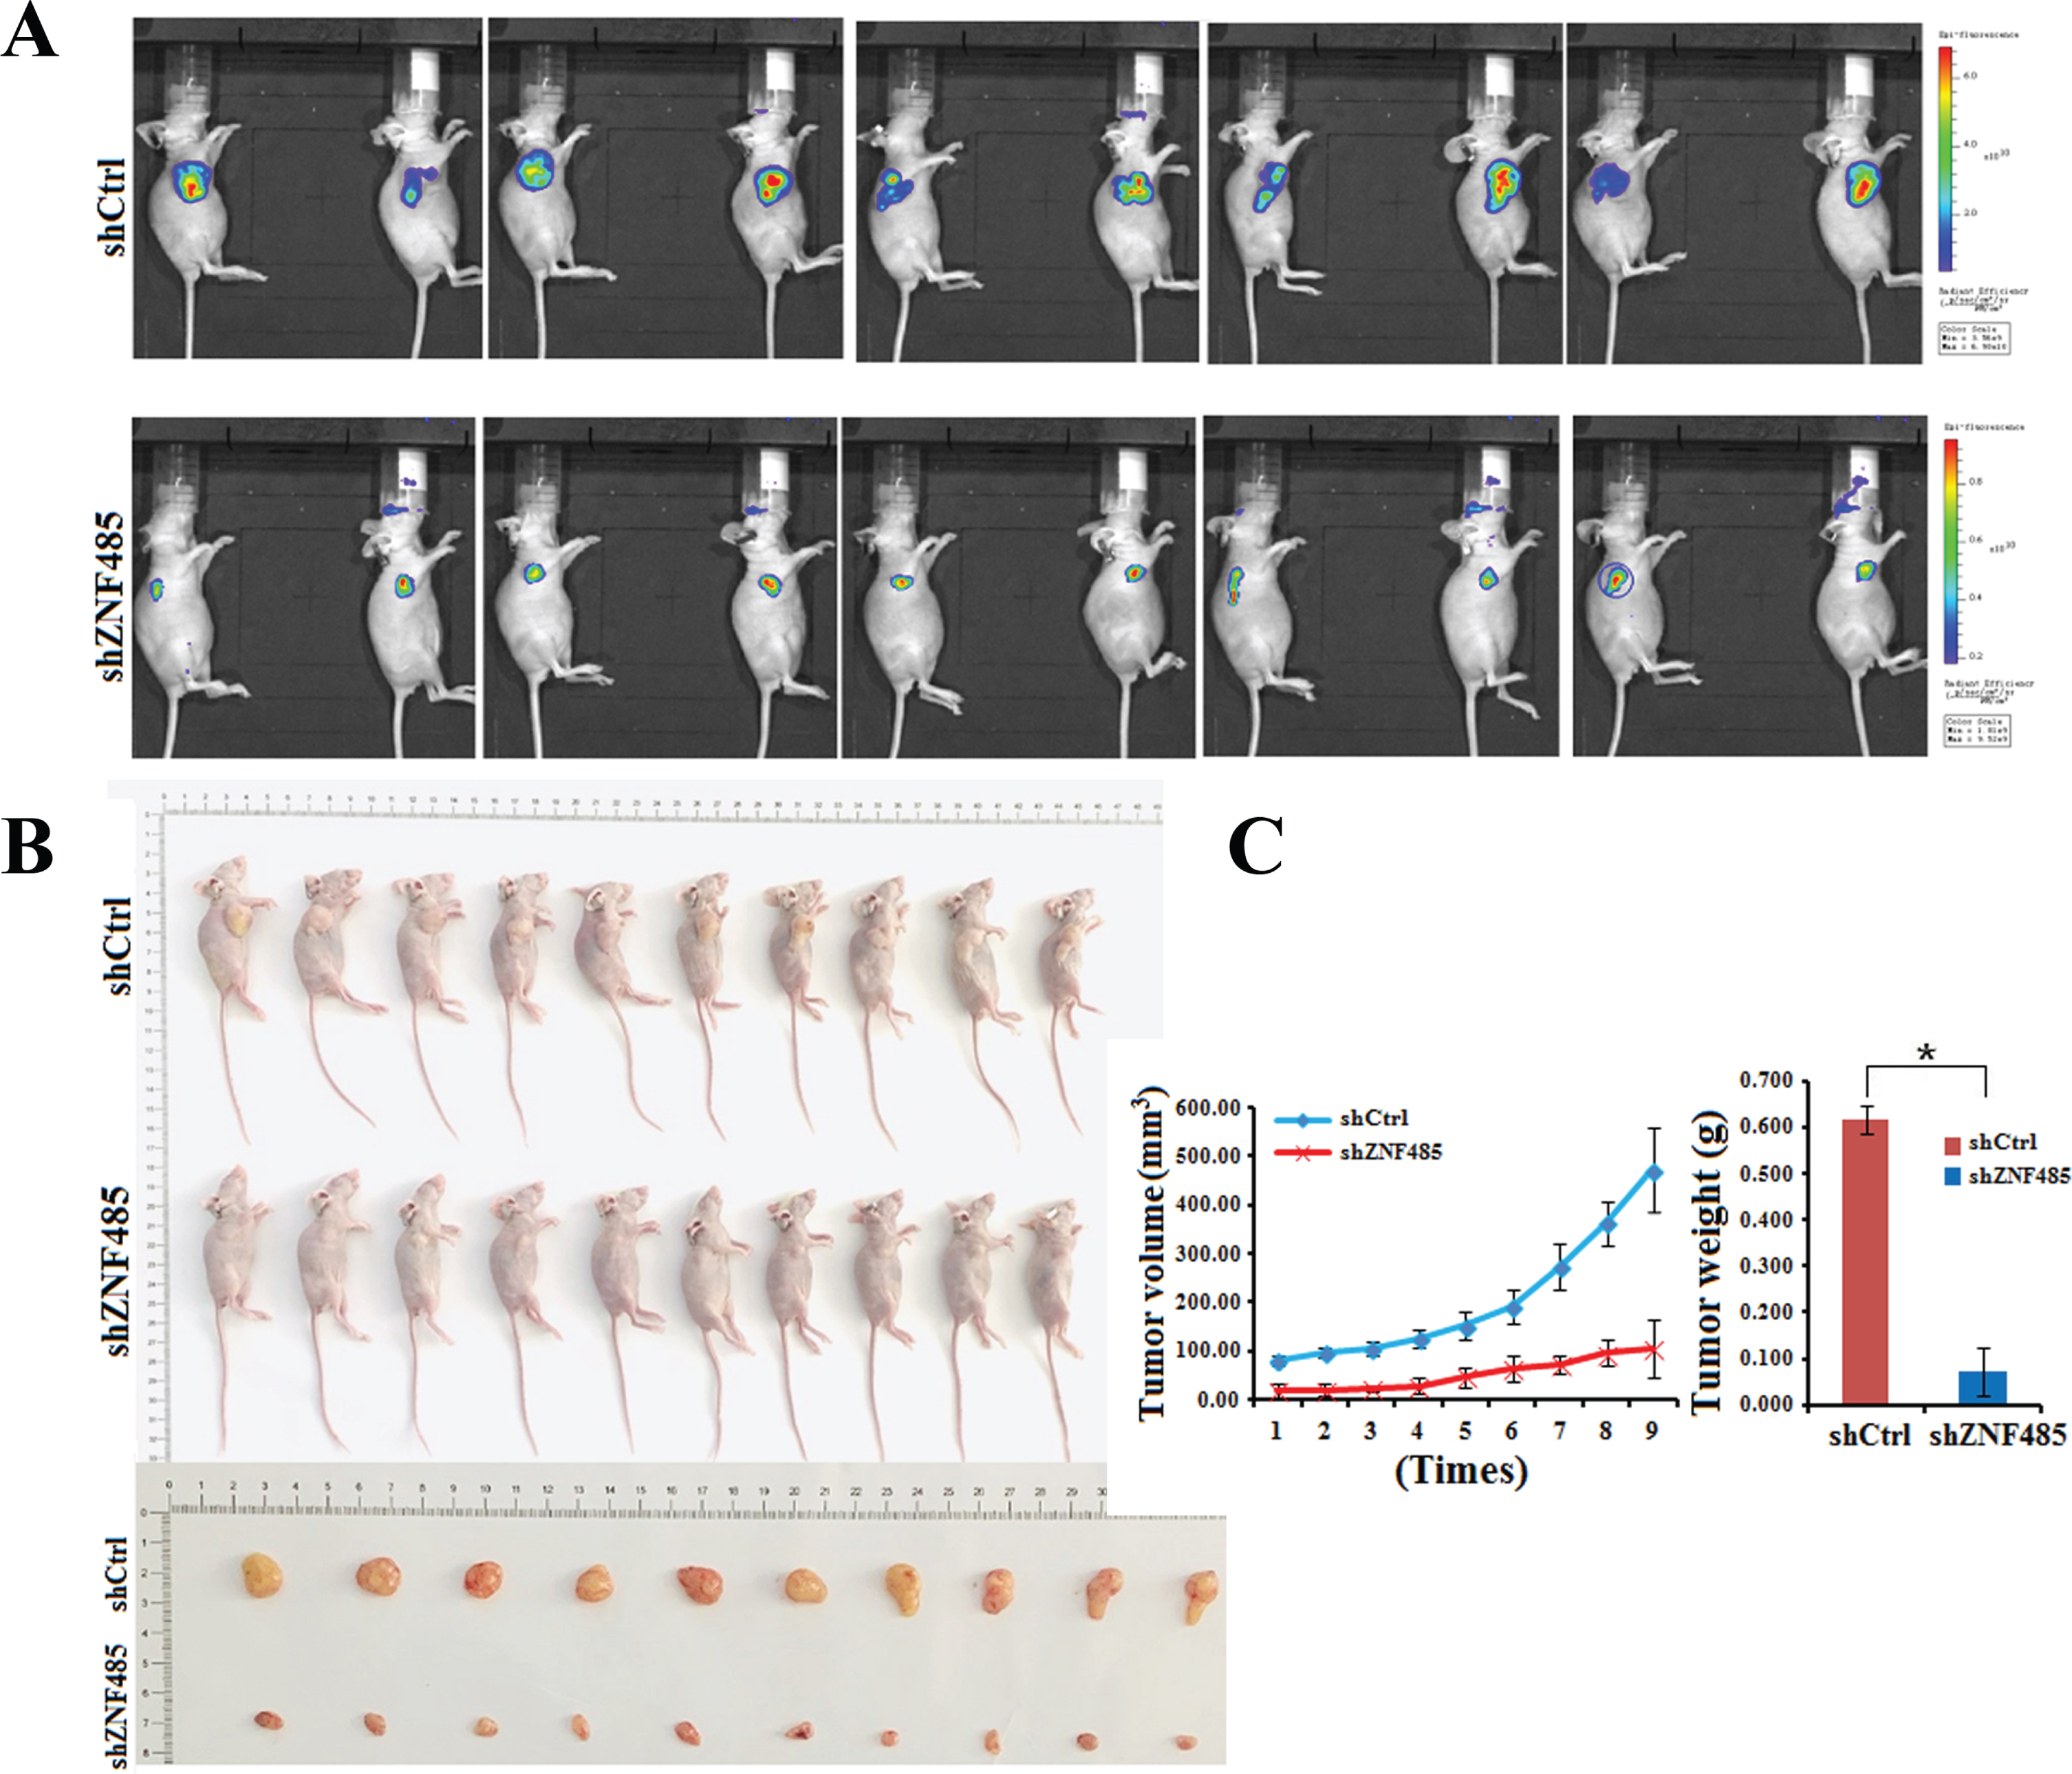 ZNF485 knockdown inhibits BLCA cell migration and tumor formation in nude mice. (A) In vivo imaging experiments of the shZNF485 group and control group showed tumor fluorescence intensity in nude mice. (B and C) The effect of ZNF485 on tumor formation, tumor weight and tumor volume change in a nude mouse T24-derived xenograft model. Representative images of tumors from ZNF485-knockdown versus the negative control (siCtrl) (n = 10 for each group).